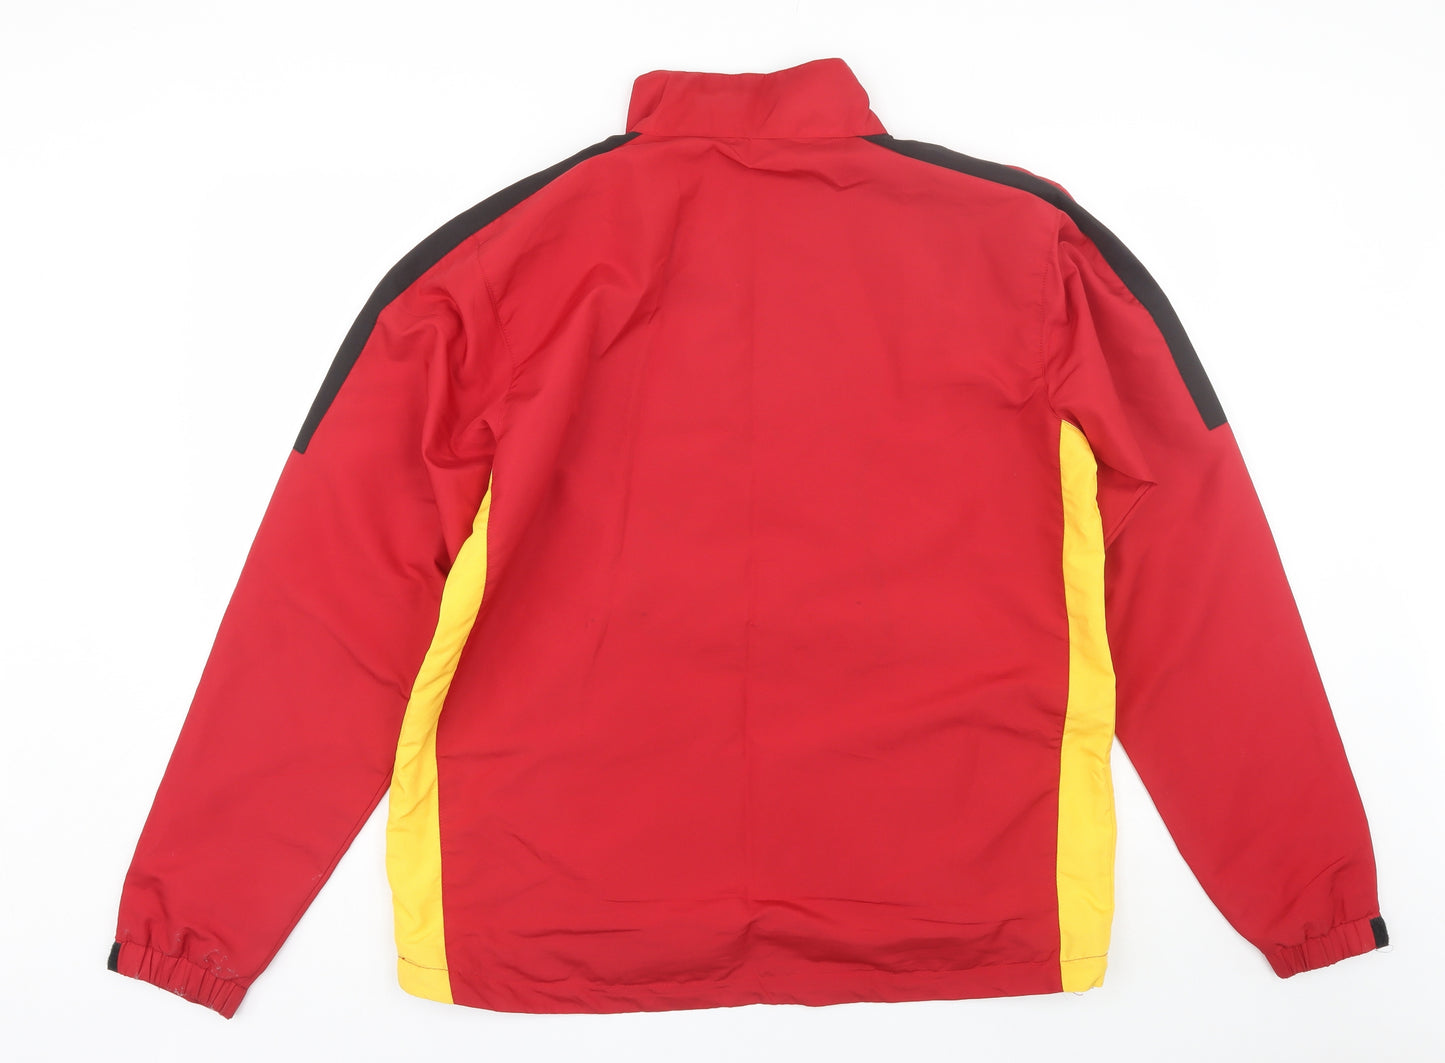 Exito Mens Red   Jacket Coat Size L  - Nantwich Cricket Club